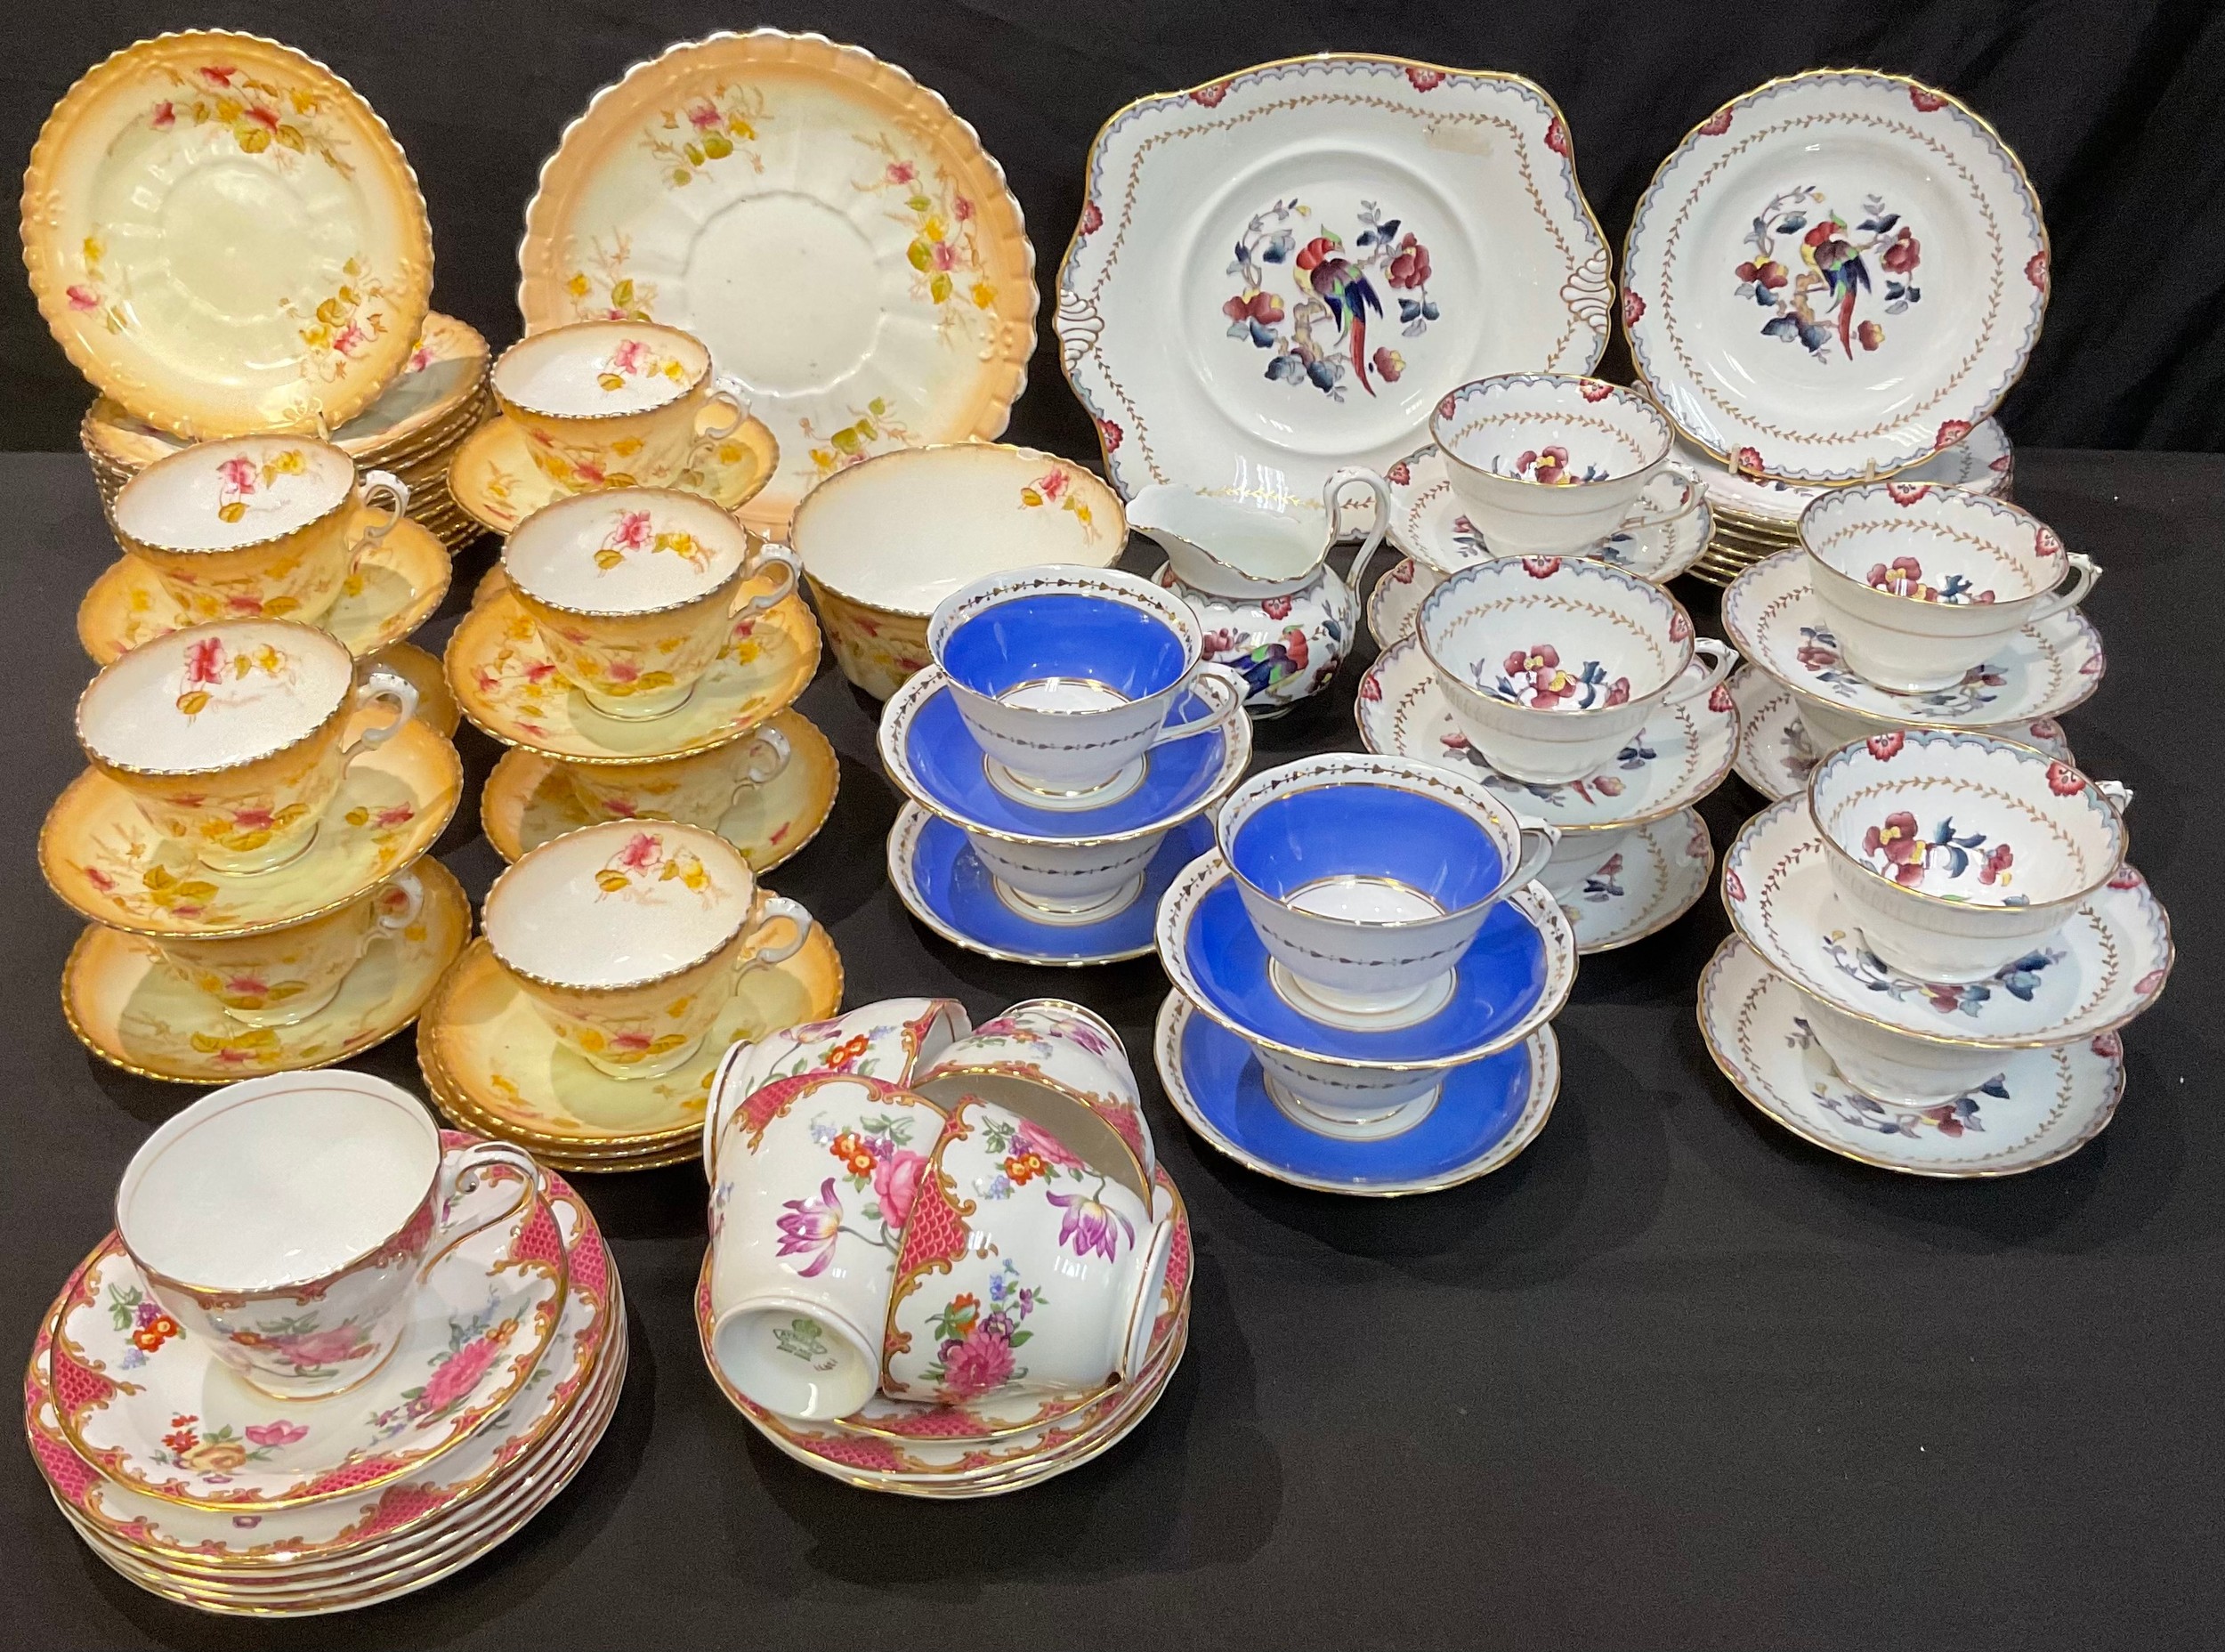 An early 20th century Royal Albert part tea service; another, Tuscan China; other tea ware including